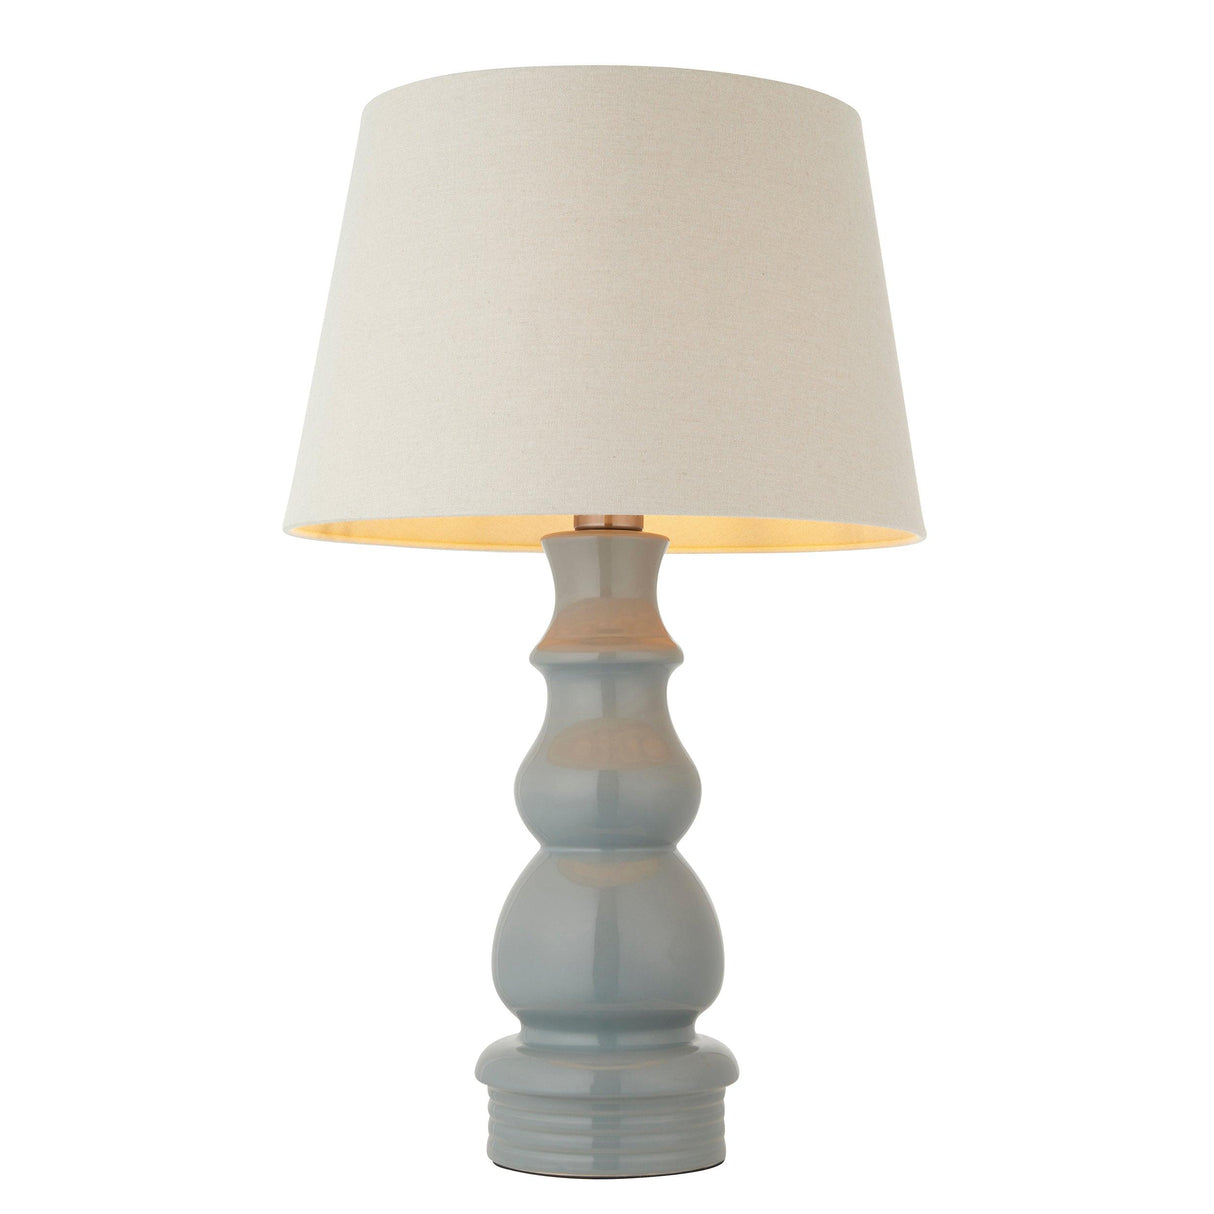 Endon Lighting 103369 - Endon Lighting 103369 Provence & Cici Indoor Table Lamps Blue grey glaze, satin nickel plate & ivory linen fabric Non-dimmable